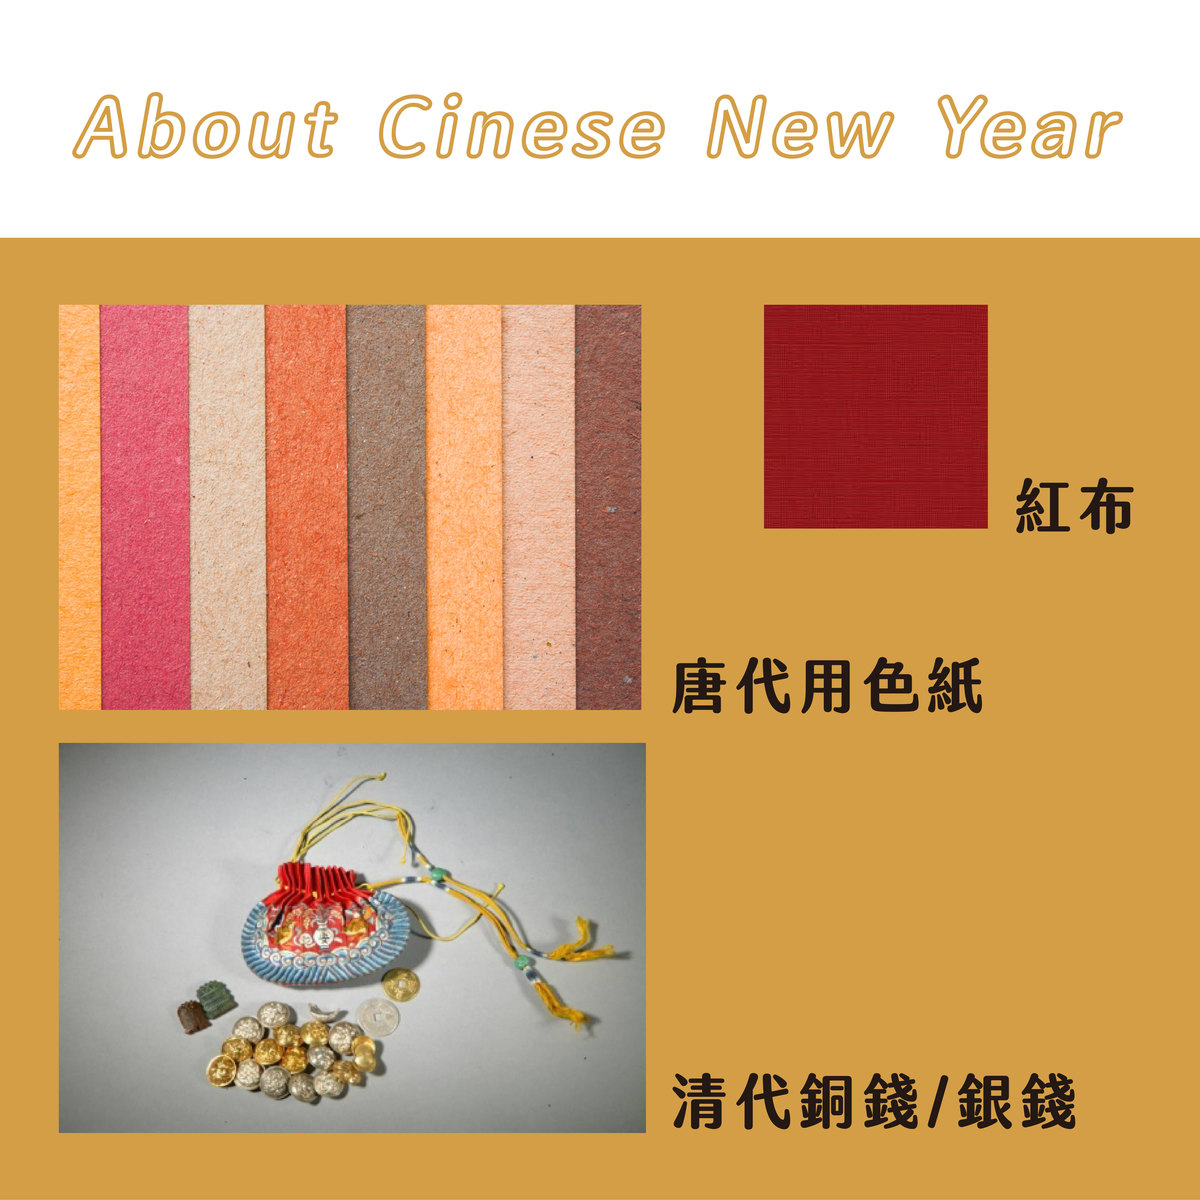 About Chinese New Year | 不可不知的6個紅包袋知識－About Chinese New Year